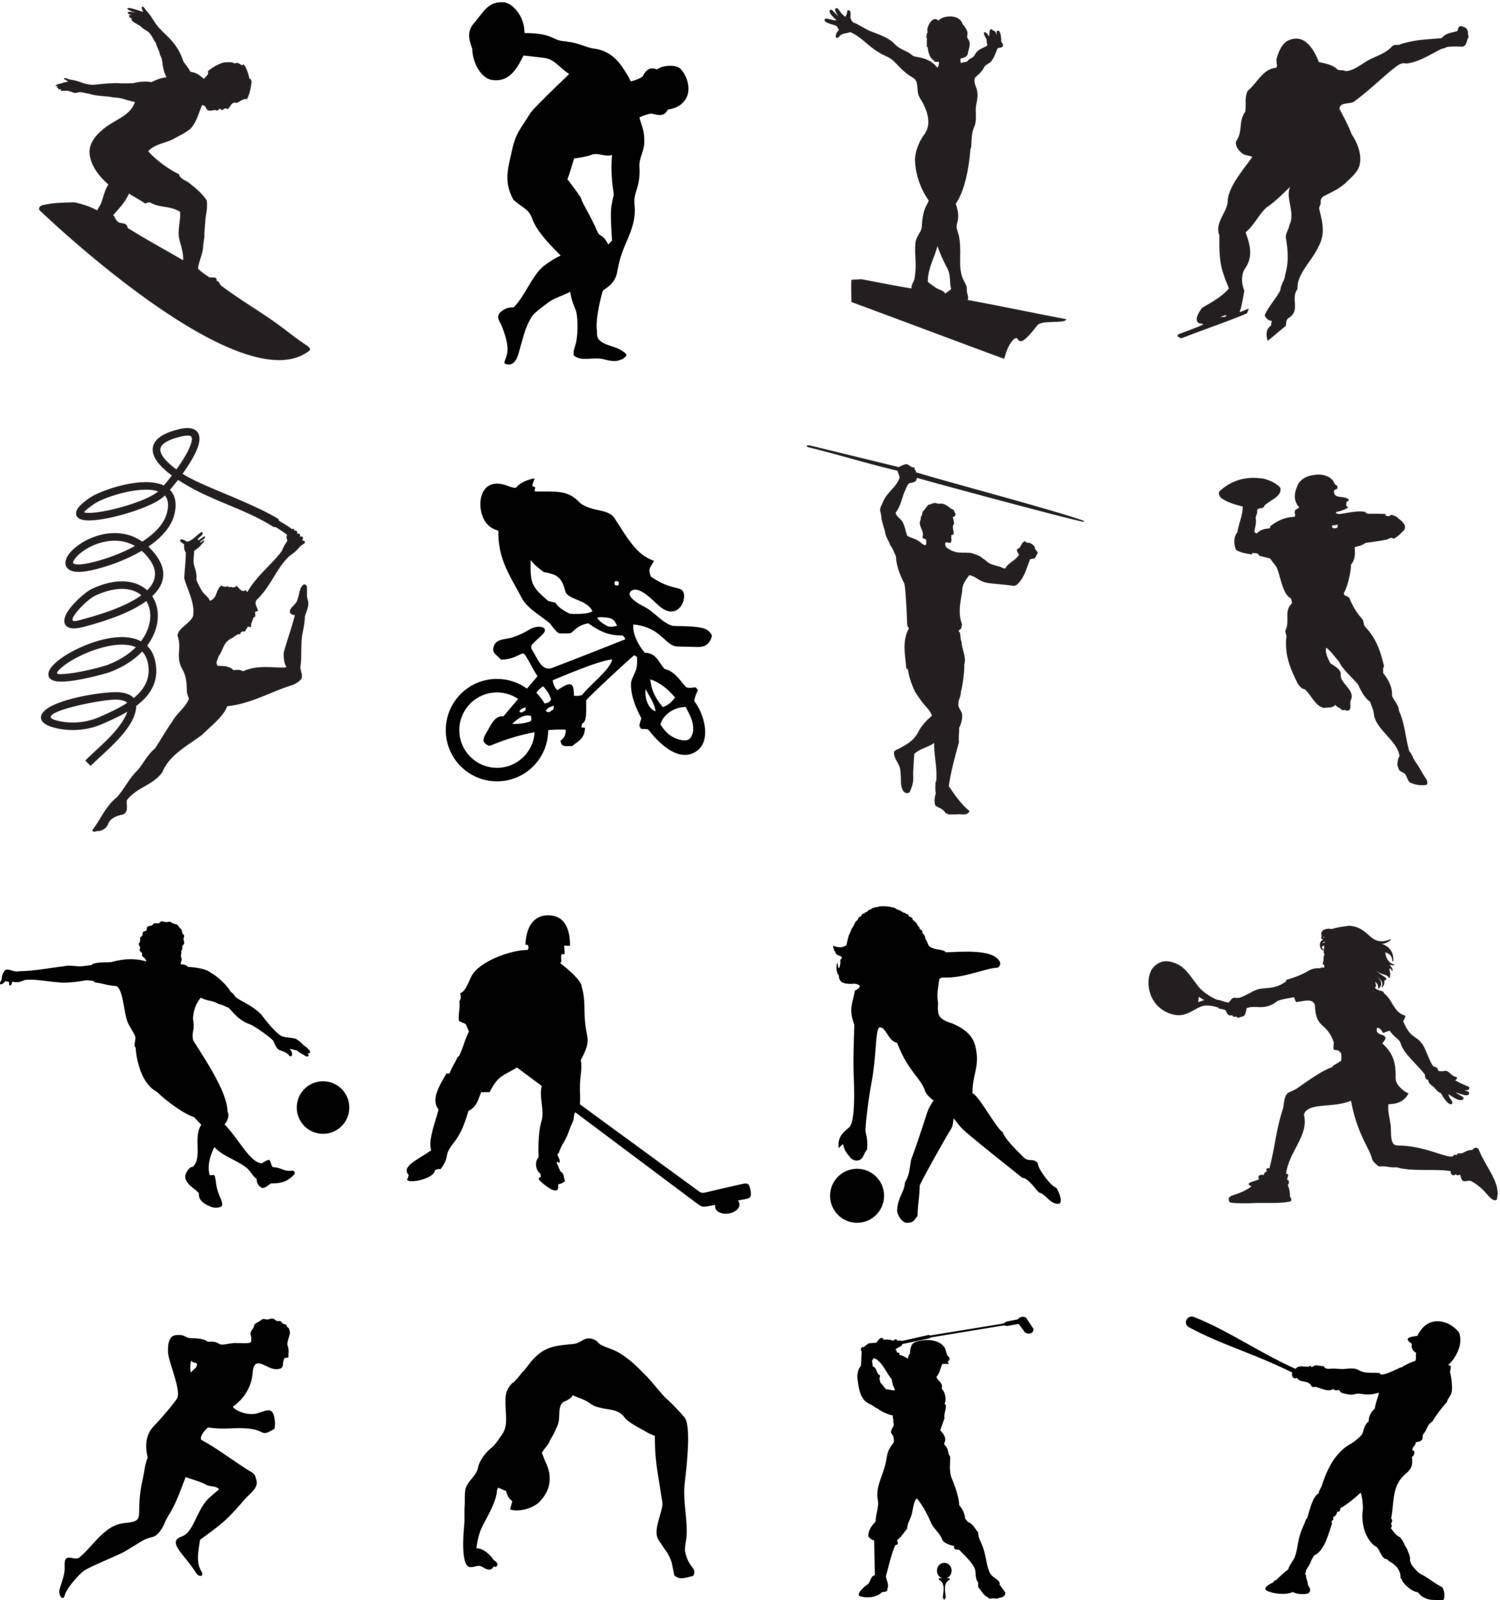 The people are engaged in different kinds of sports. A vector illustration.